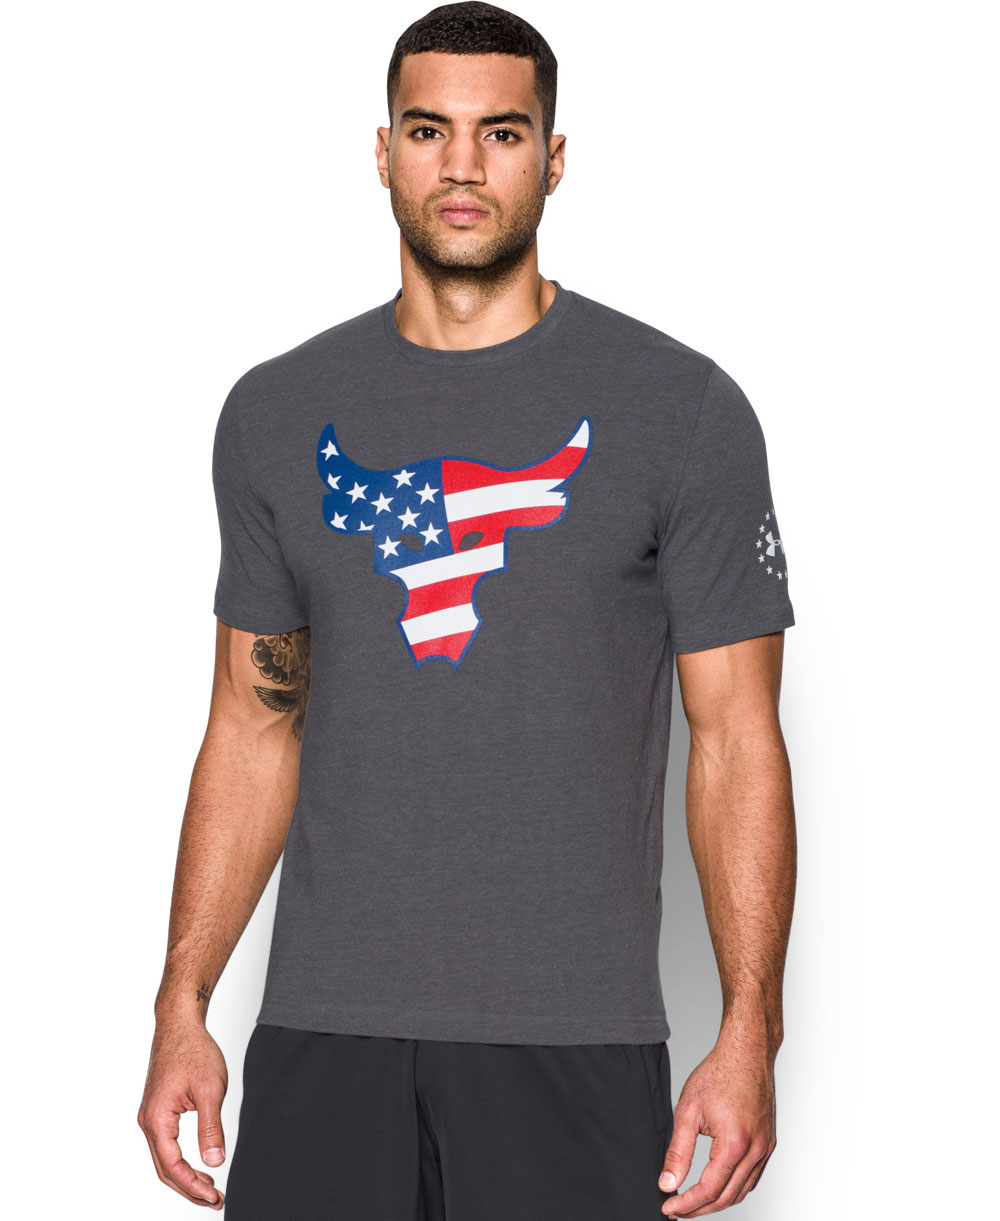 https://www.anygivensunday.shop/1390-large_default/under-armour-mens-short-sleeve-t-shirt-freedom-rock-the-troops-carbon-heather.jpg